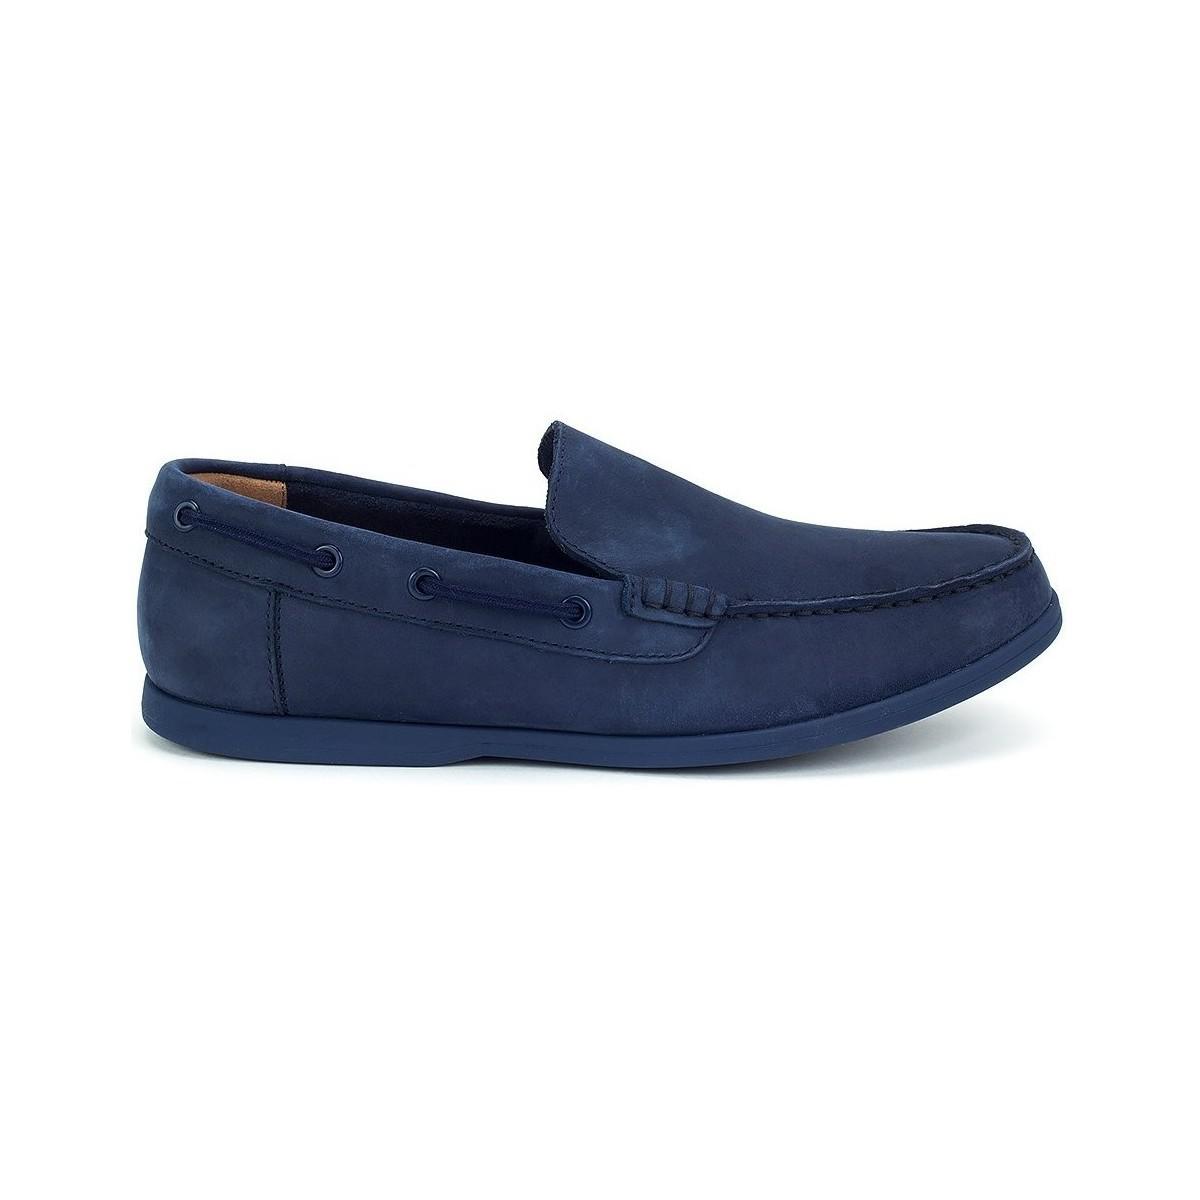 clarks blue loafers Cheaper Than Retail 